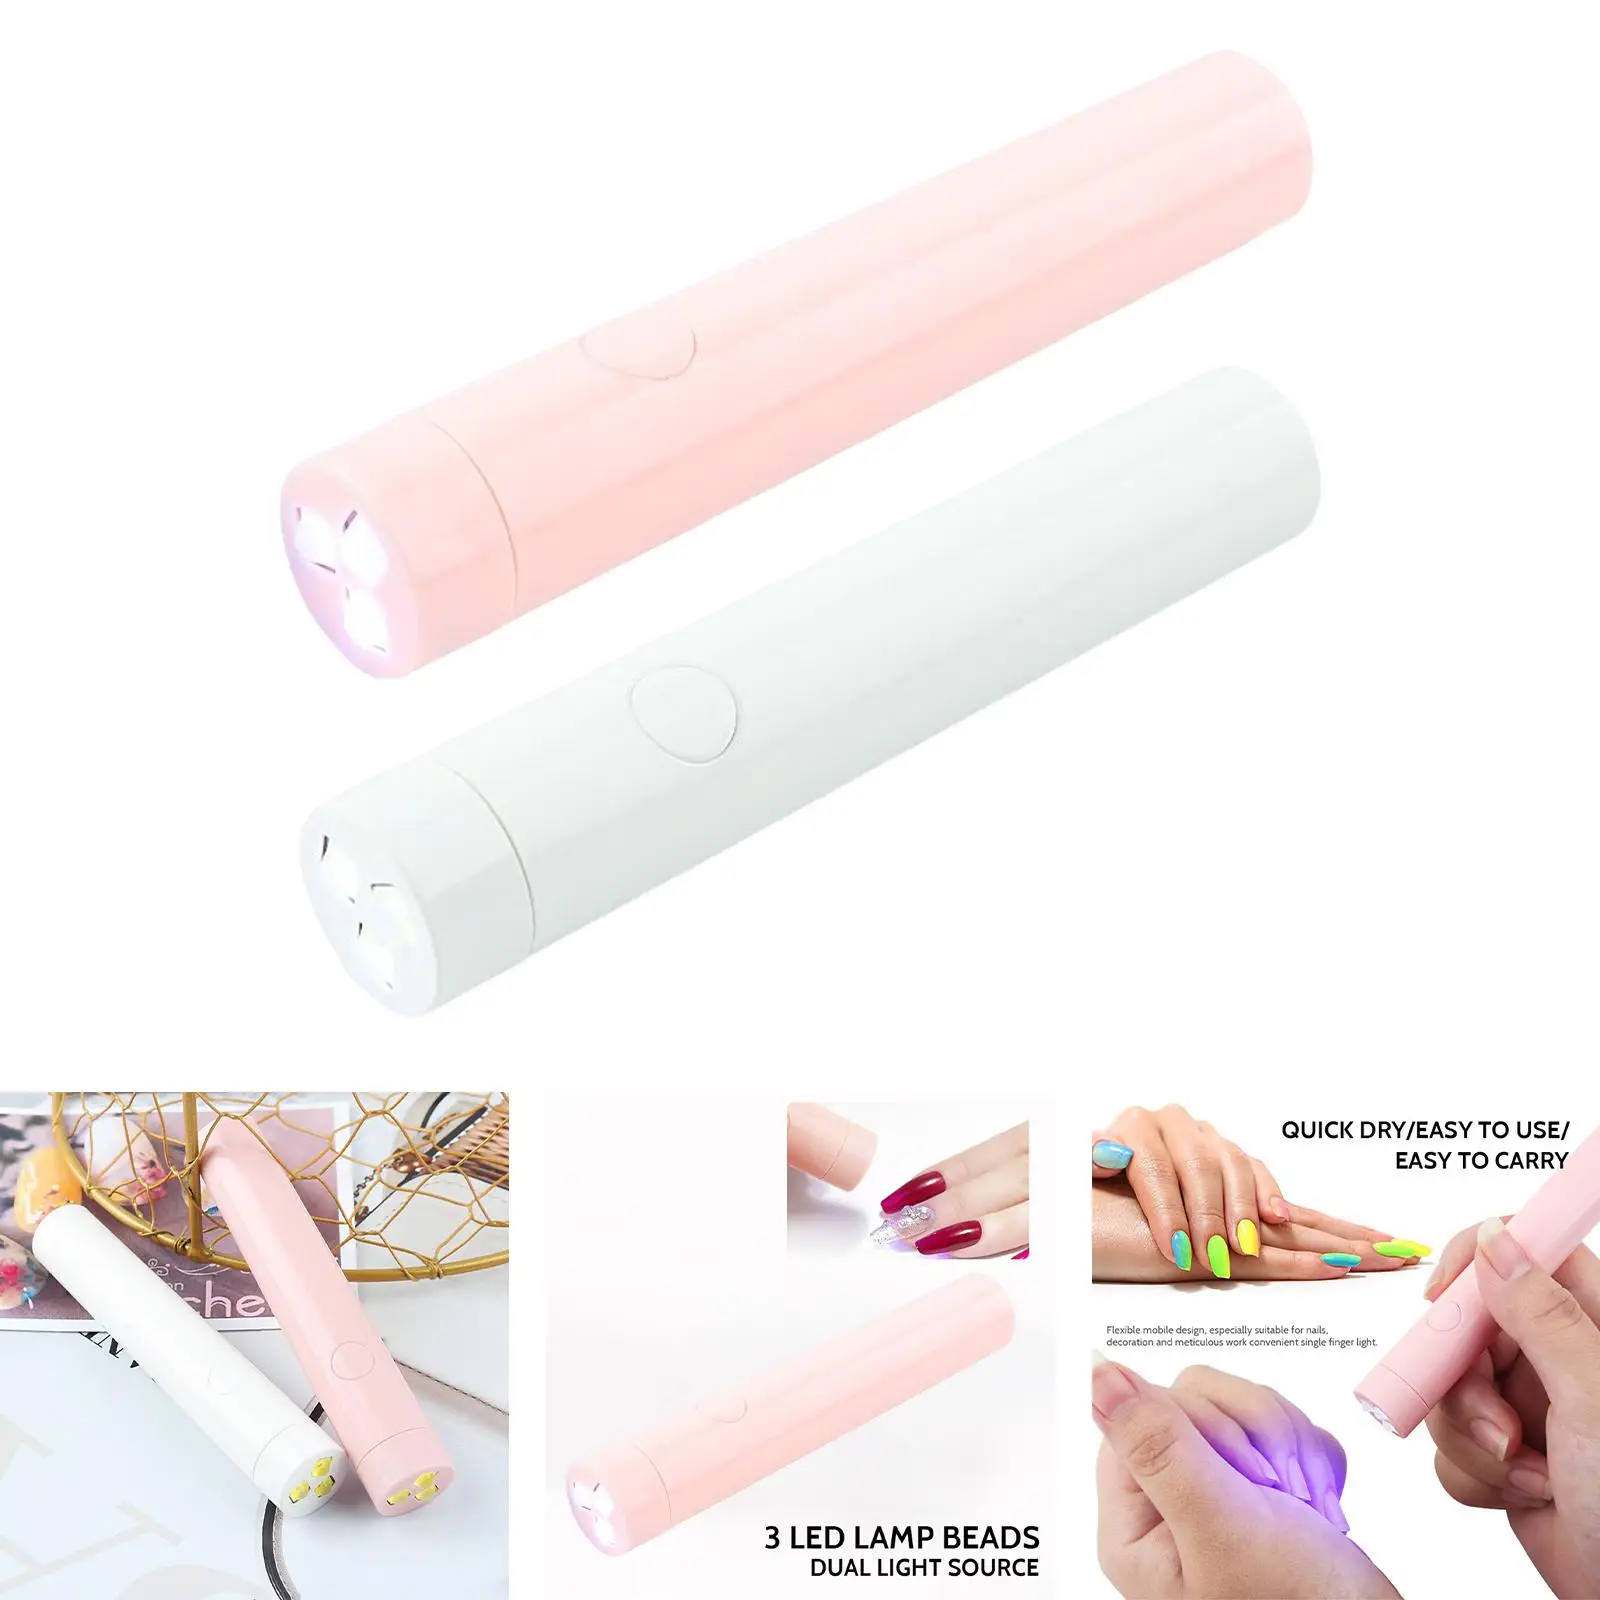 Mini LED Flashlight Lamp Nail Dryer Type C Port Small Size 18x107mm Easy to Use Fast Dry Professional Handheld Jewelry Tools 6W